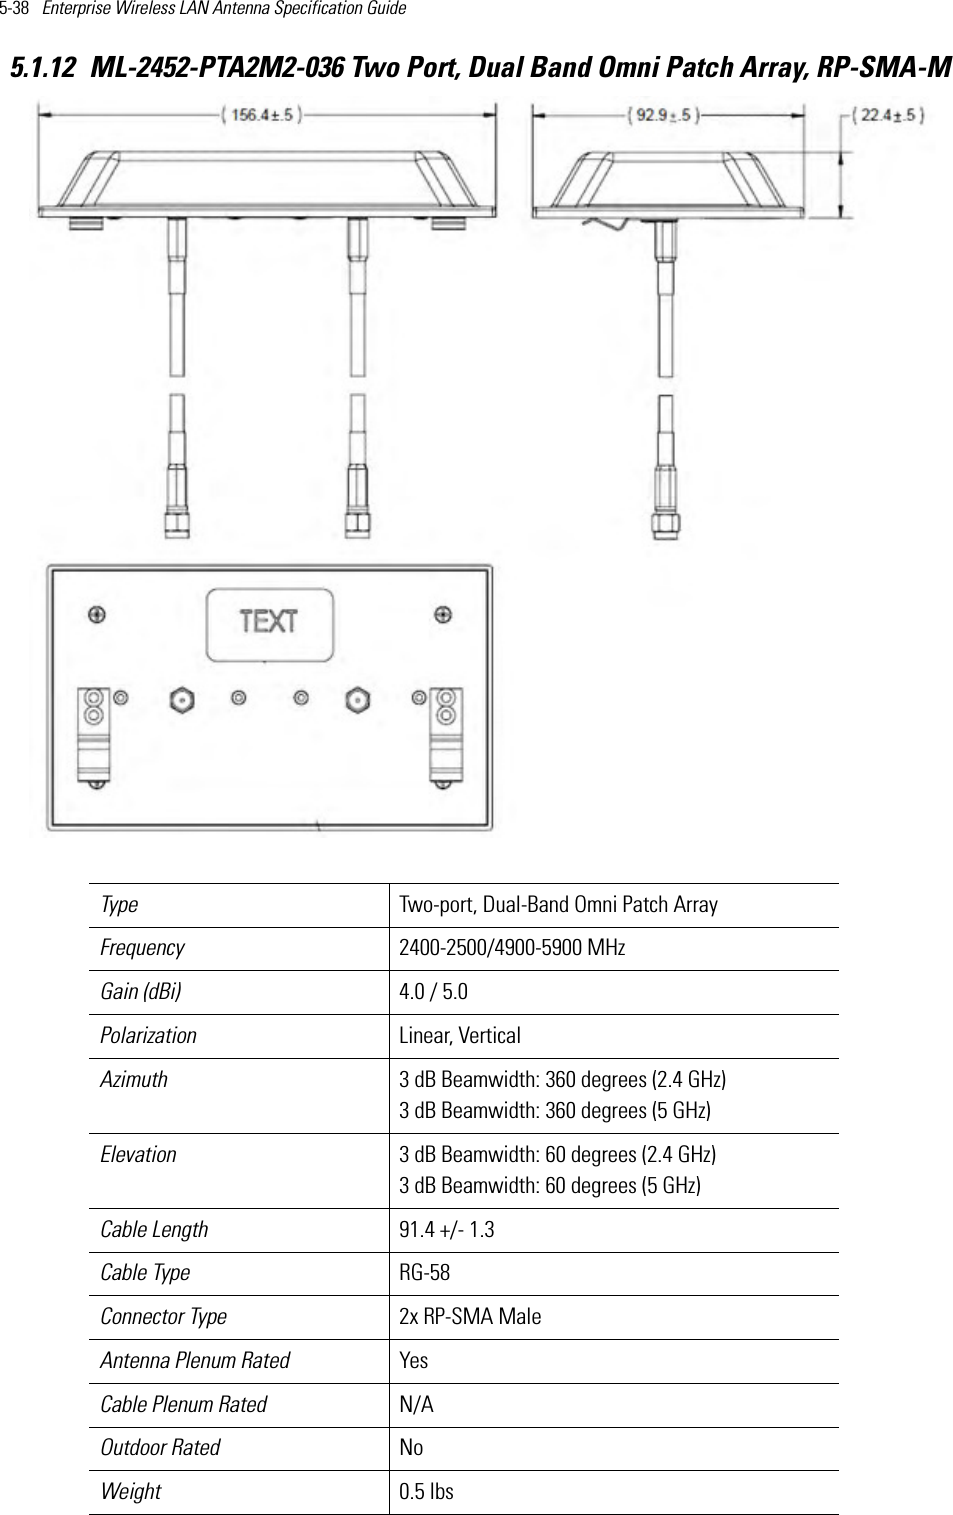 5-38   Enterprise Wireless LAN Antenna Specification Guide 5.1.12 ML-2452-PTA2M2-036 Two Port, Dual Band Omni Patch Array, RP-SMA-M  Type Two-port, Dual-Band Omni Patch Array   Frequency 2400-2500/4900-5900 MHzGain (dBi) 4.0 / 5.0Polarization Linear, VerticalAzimuth 3 dB Beamwidth: 360 degrees (2.4 GHz)3 dB Beamwidth: 360 degrees (5 GHz) Elevation 3 dB Beamwidth: 60 degrees (2.4 GHz)3 dB Beamwidth: 60 degrees (5 GHz)  Cable Length  91.4 +/- 1.3 Cable Type RG-58Connector Type 2x RP-SMA Male Antenna Plenum Rated YesCable Plenum Rated N/AOutdoor Rated NoWeight 0.5 lbs